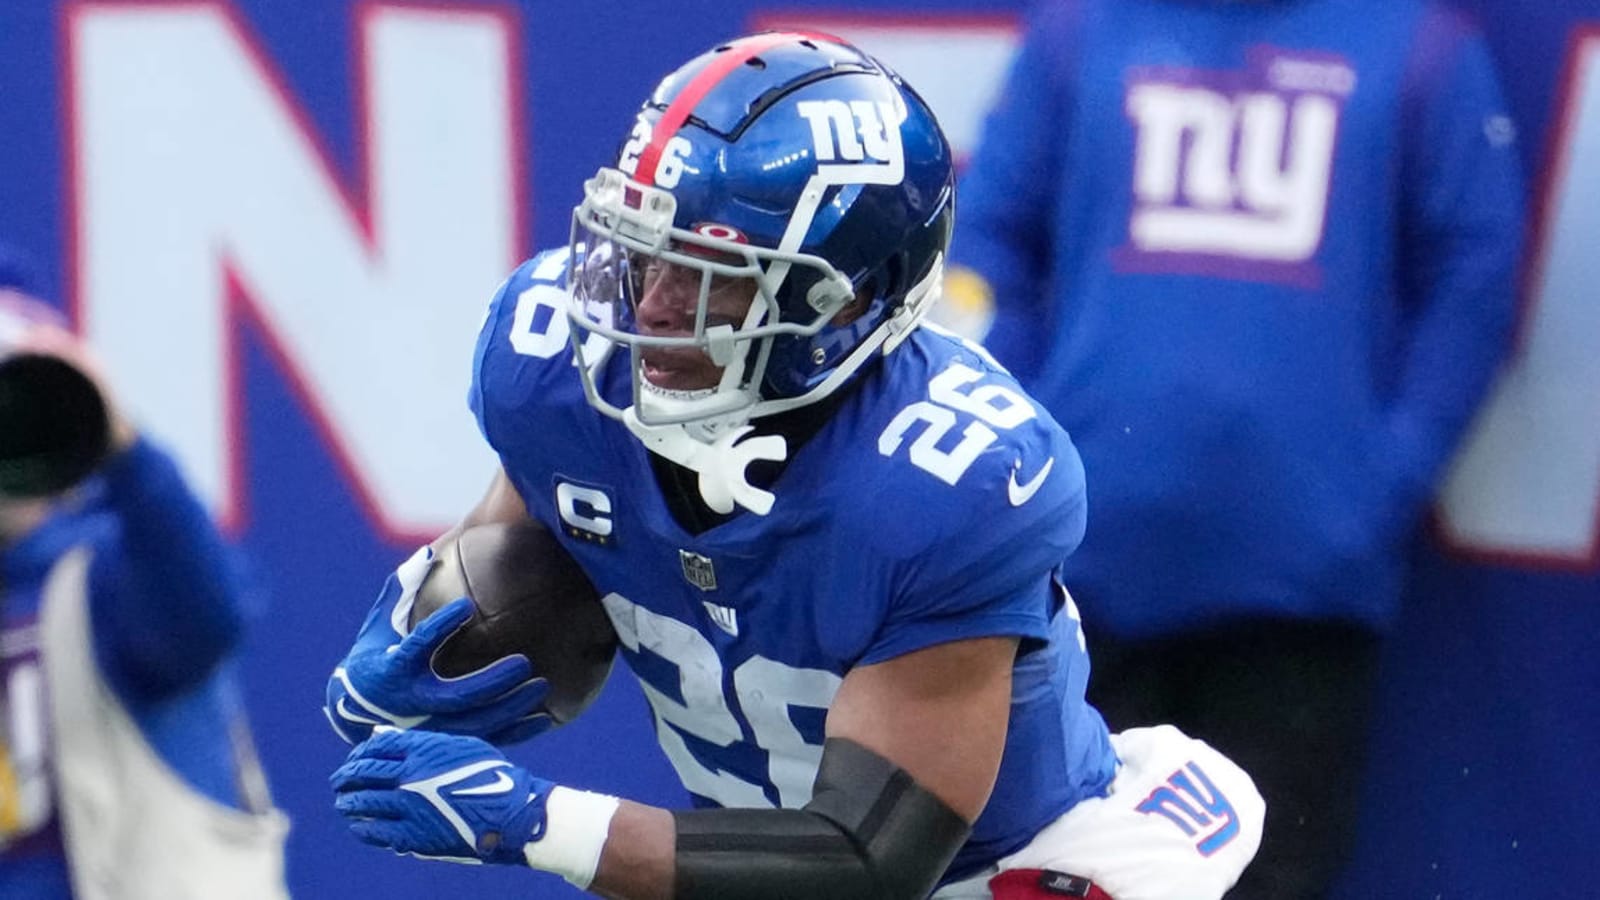 Watch: Giants RB Saquon Barkley makes absurd one-handed catch for first down